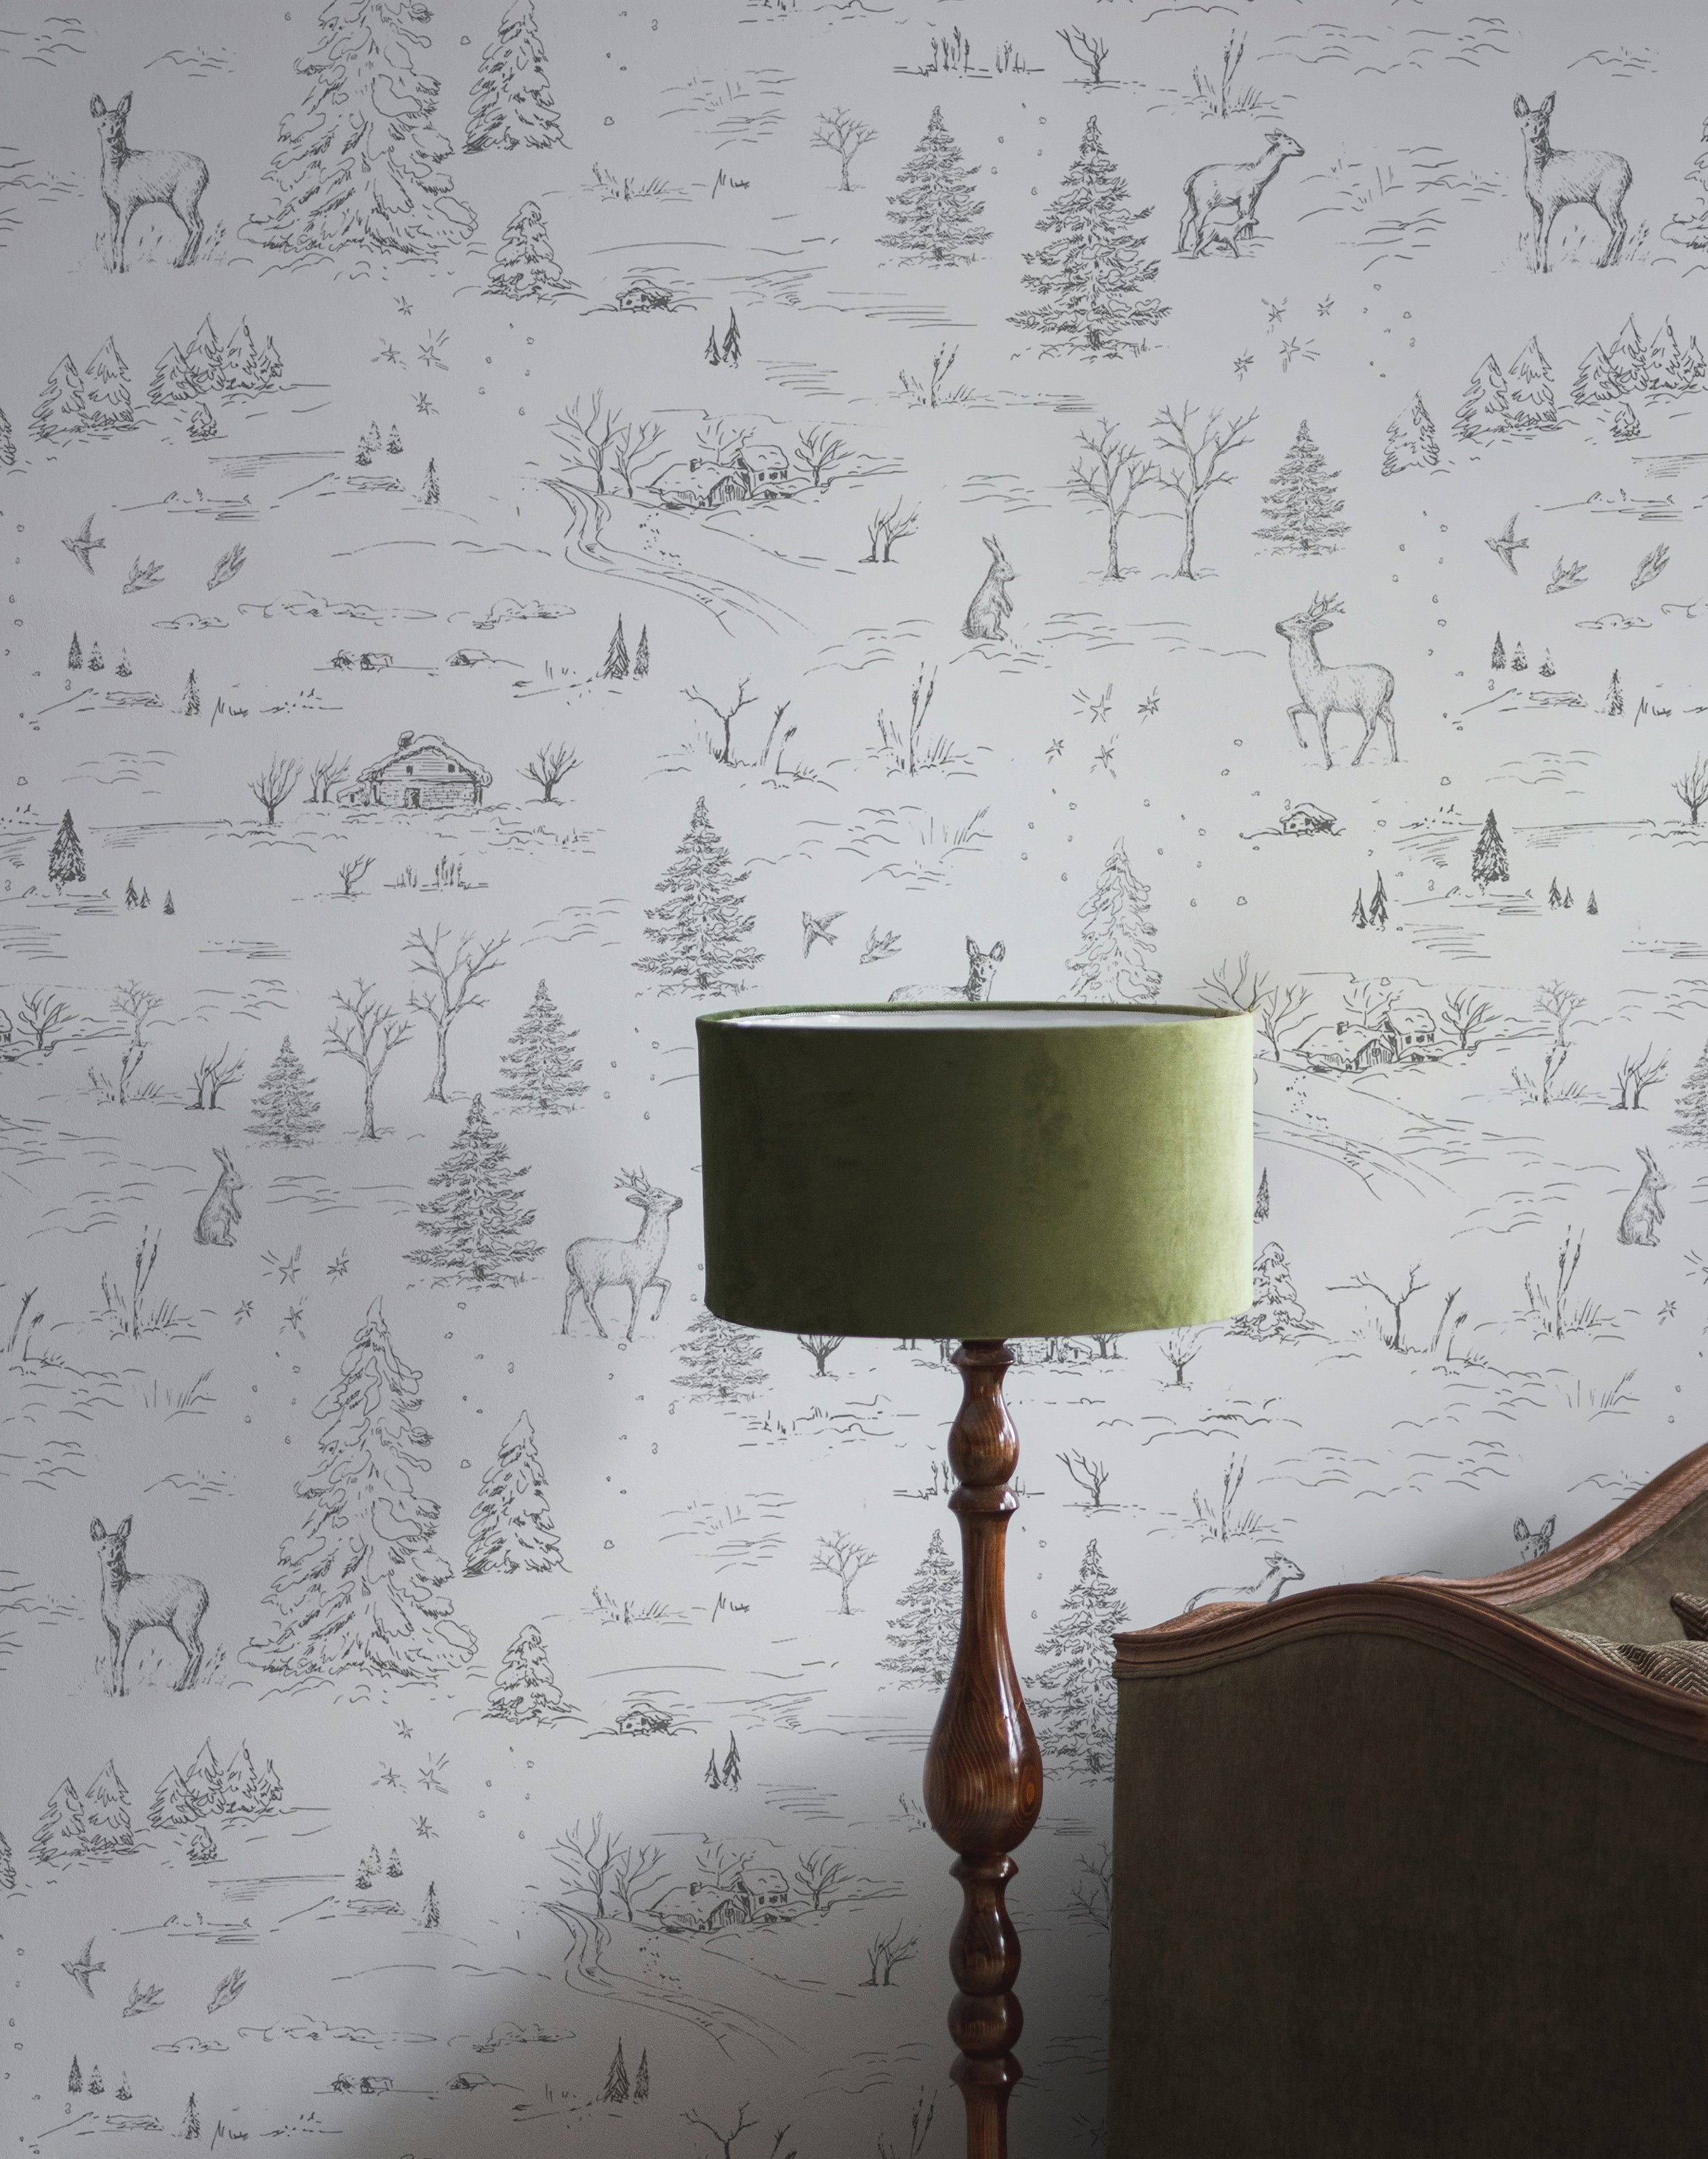 A close-up view of a room corner, where the winter-themed wallpaper provides an elegant backdrop to a vintage floor lamp with a green shade, highlighting the intricate details of the sketched wildlife and trees.